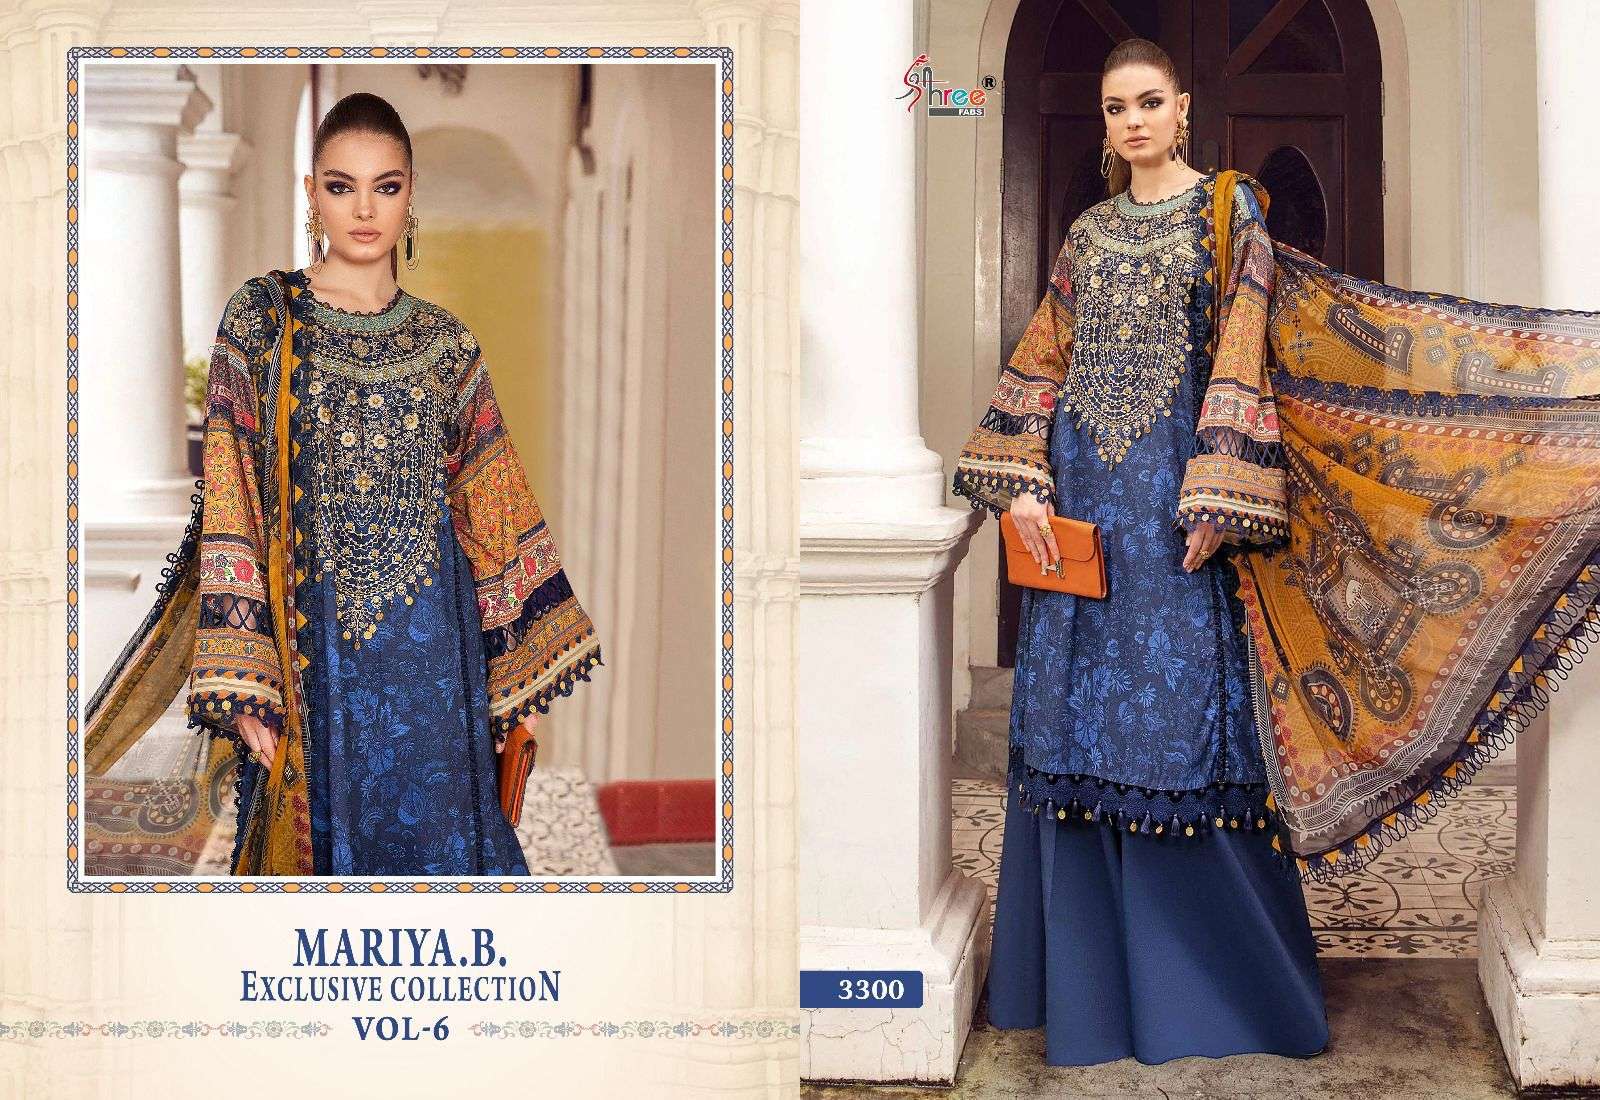 shree fabs maria b exclusive collection vol 6 cotton catchy look salwar suit silver dupatta  catalog